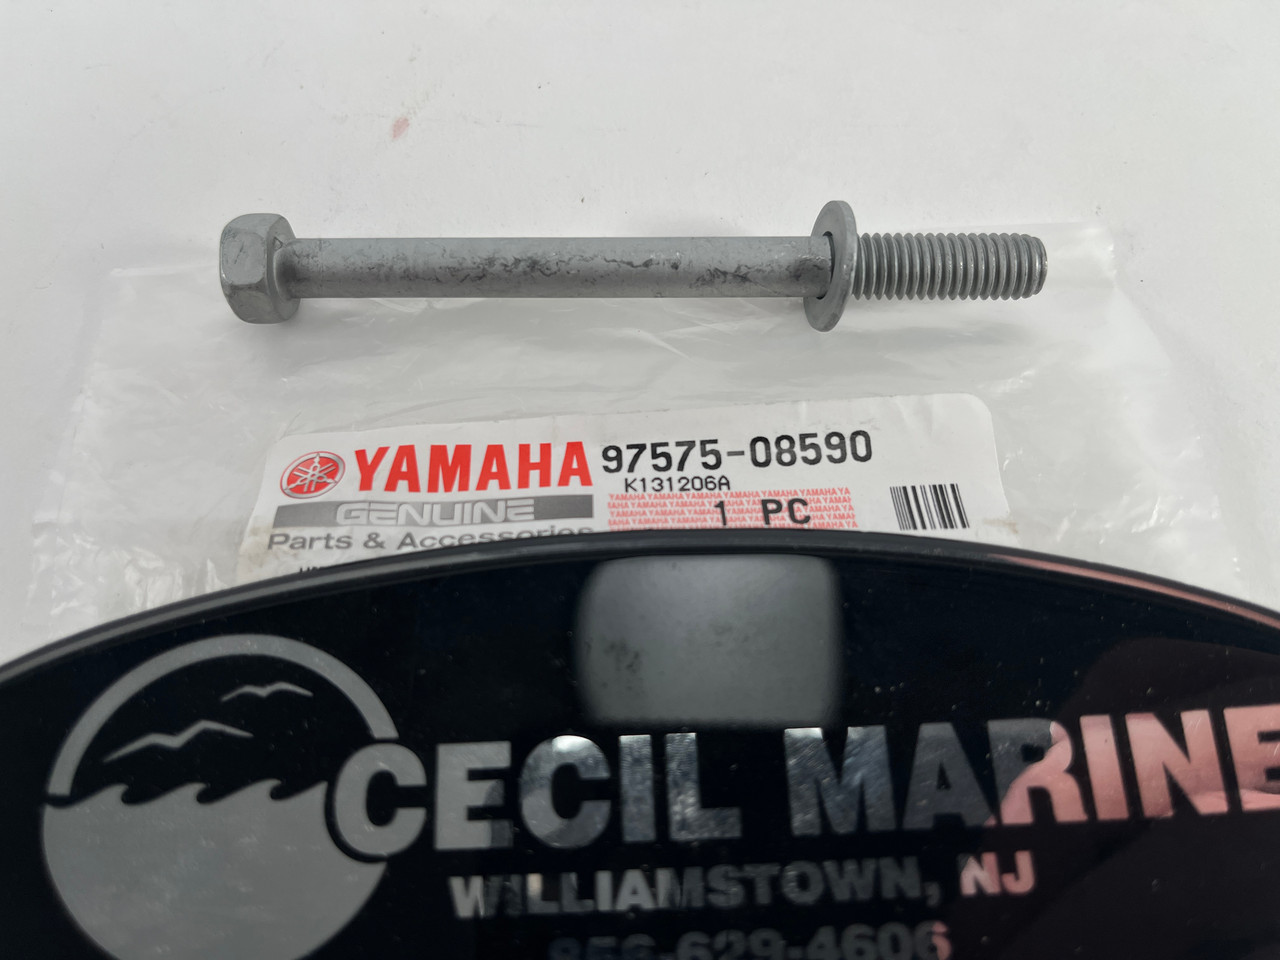 $8.25 GENUINE YAMAHA SCREW WITH WASHER no tax*  (97575-08590) In Stock And Ready To Ship!